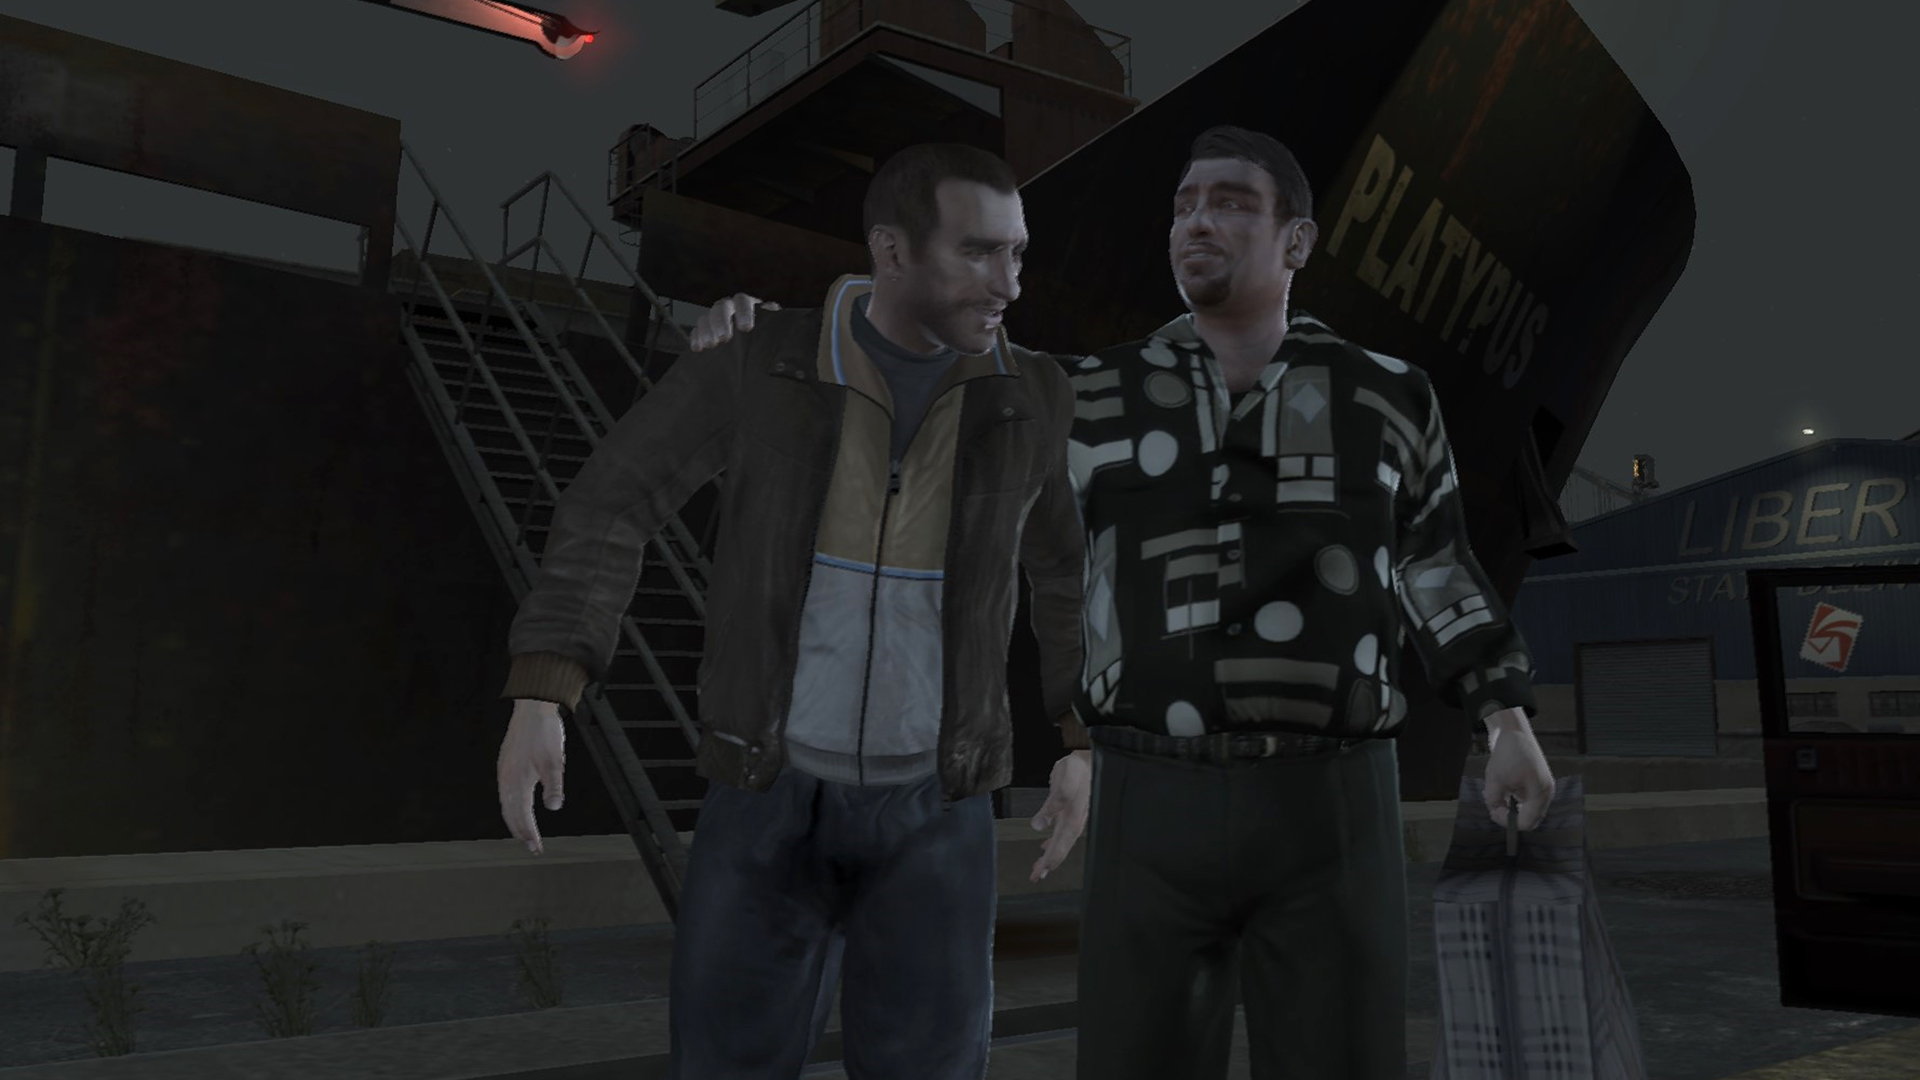 script hook failed to detect game version gta4